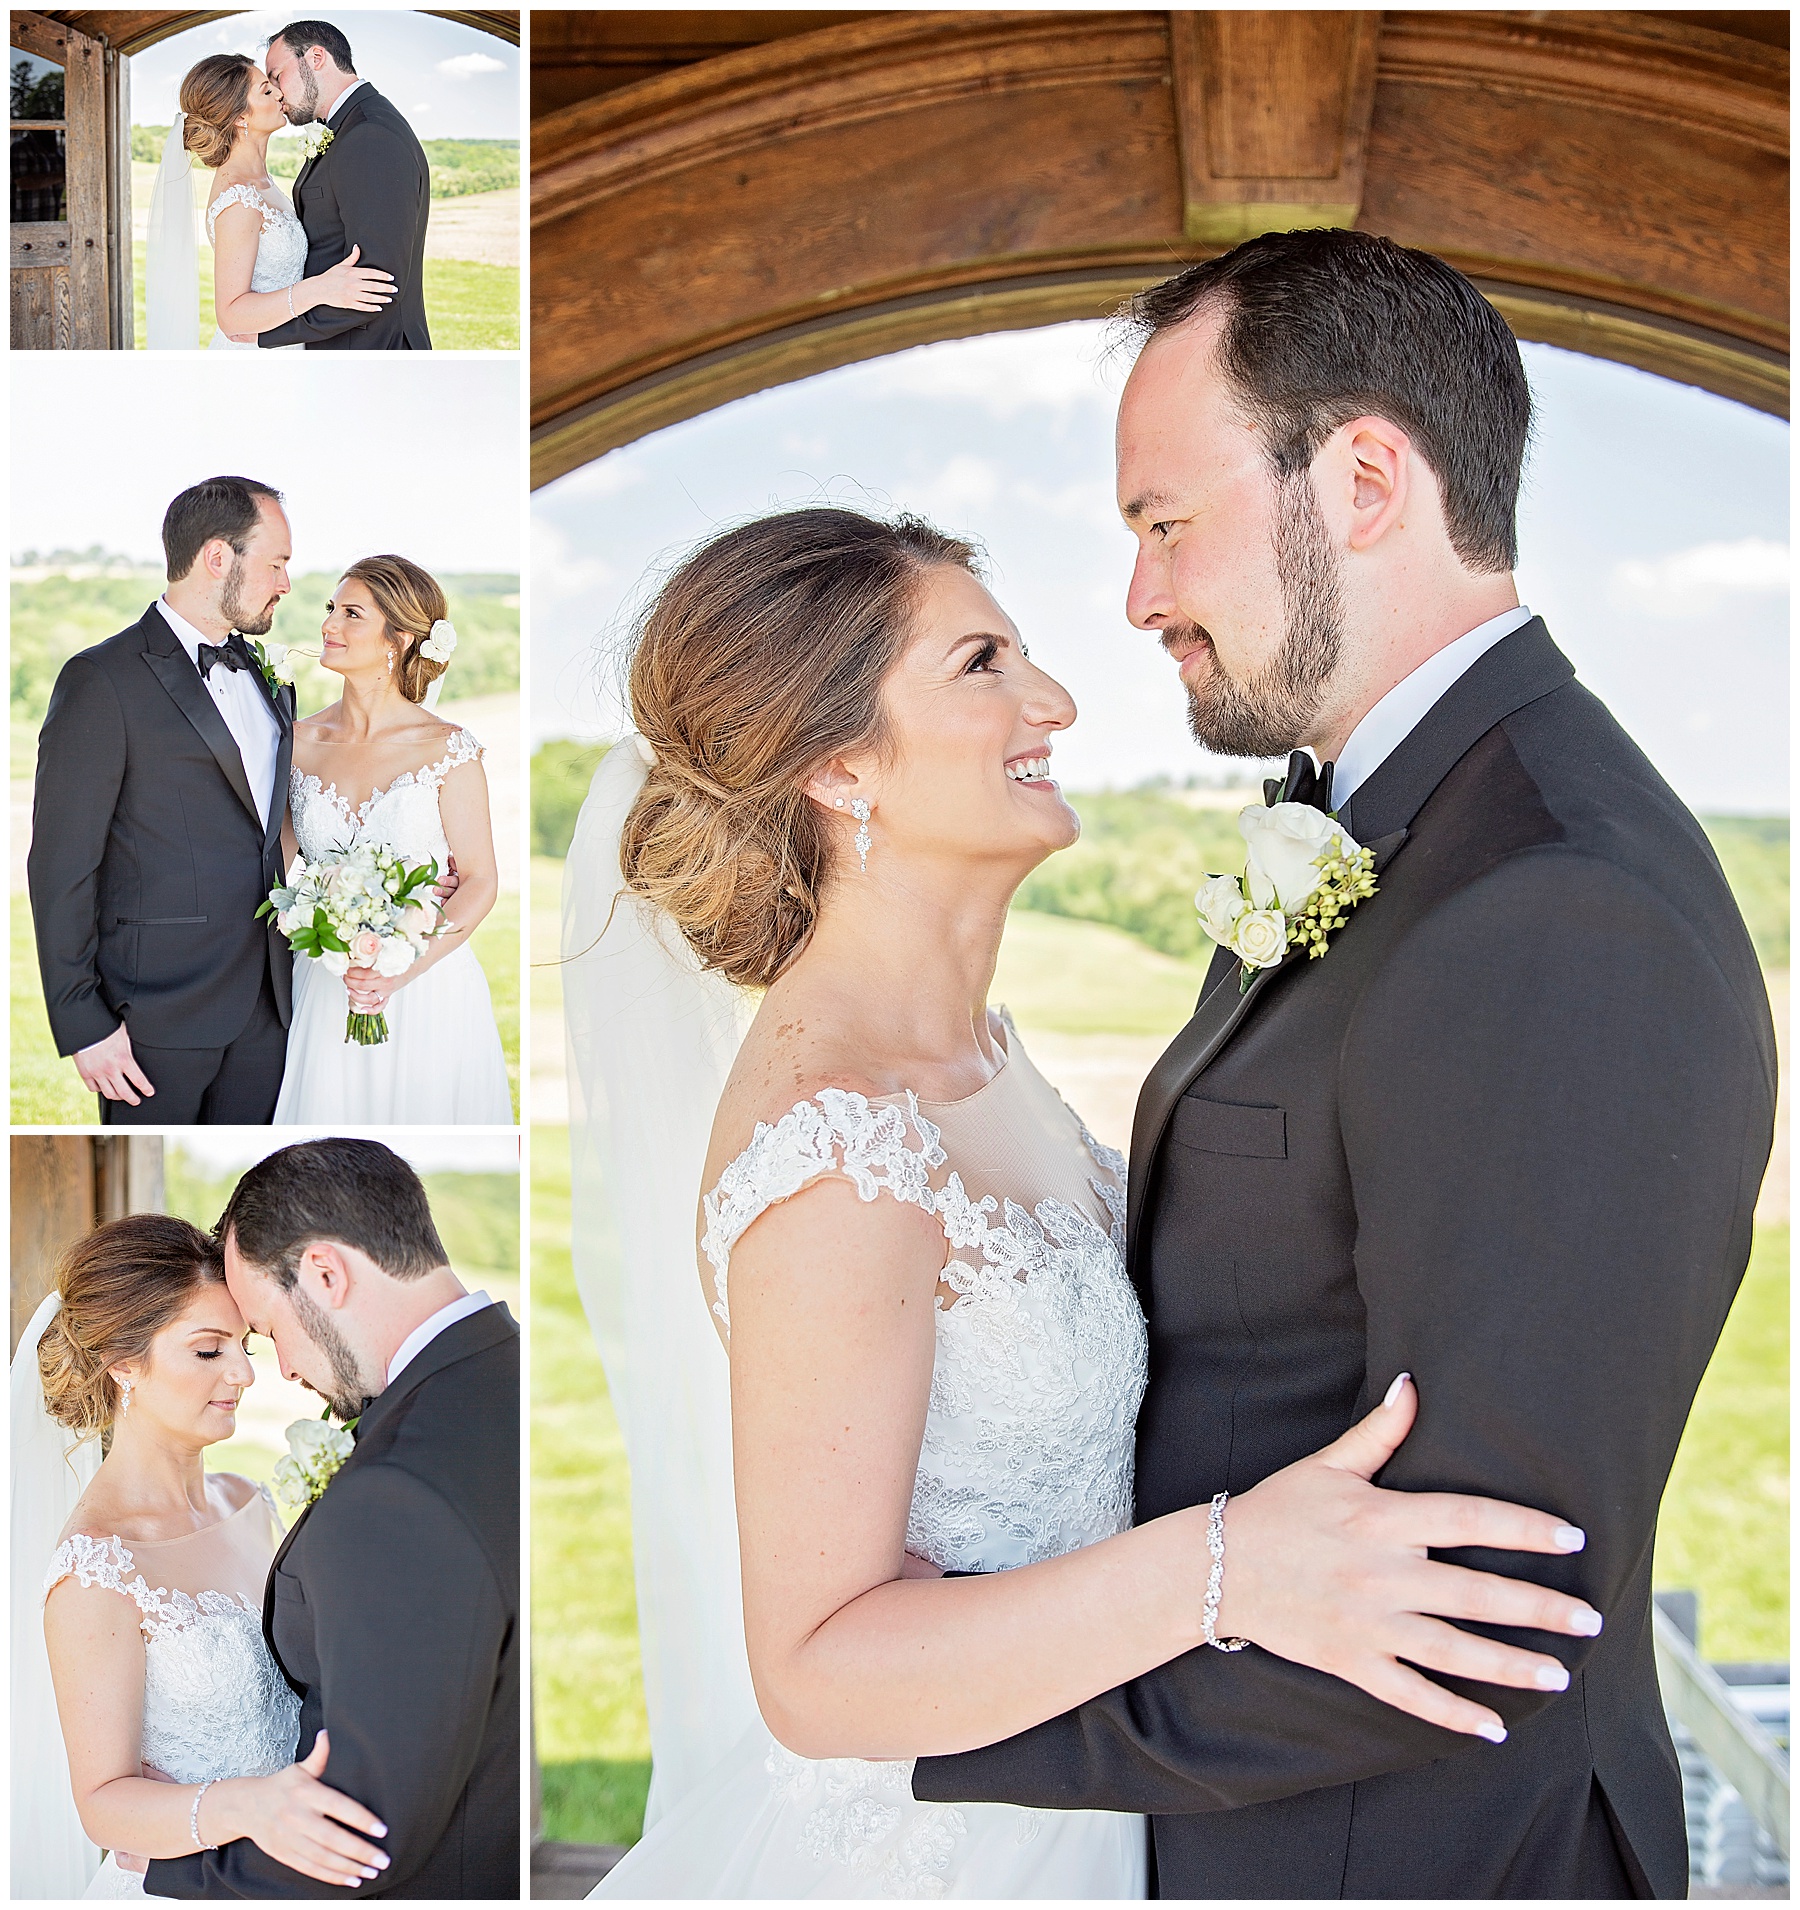 Bride and Groom Portraits